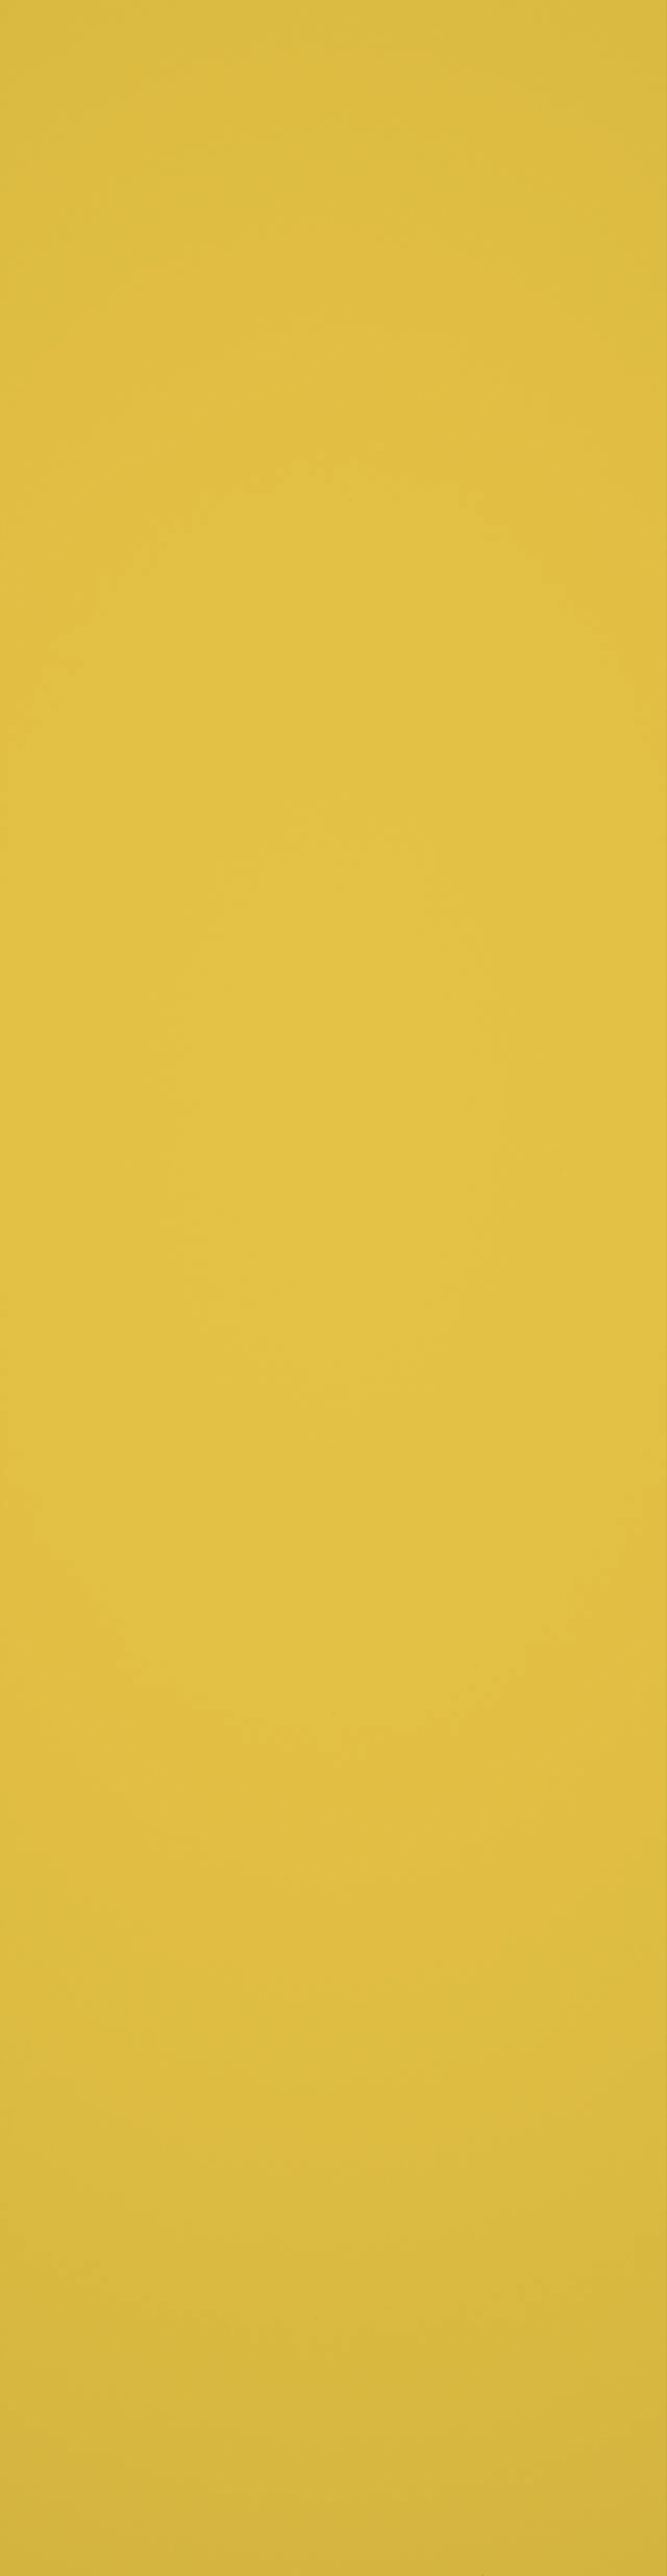 Baderomsp 5223f00 yellow no tile 10x620x2400 null - null - 3 - Miniatyr